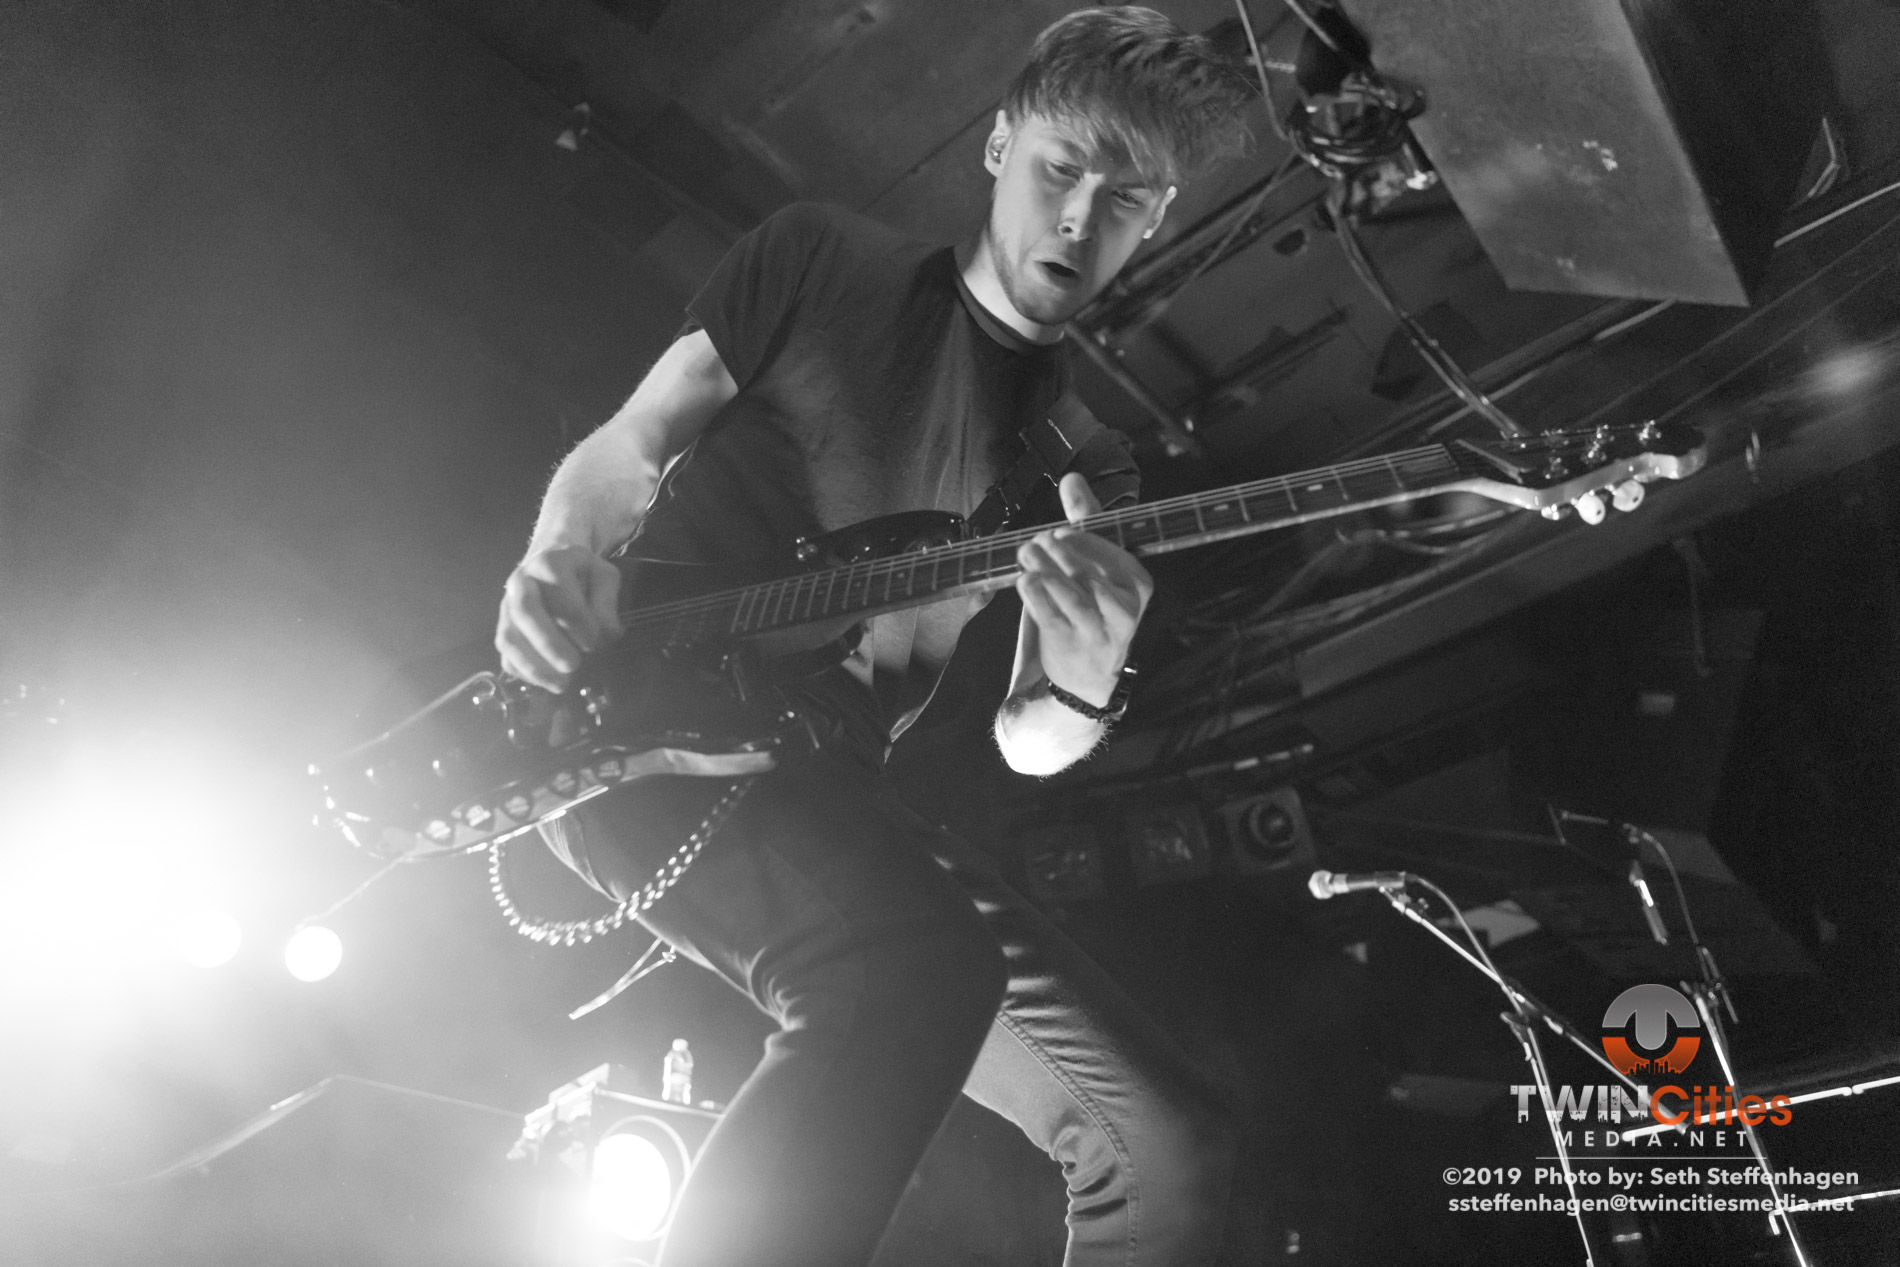 March 12, 2019 - Minneapolis, Minnesota, United States -  Sleep Signals live in concert at The Cabooze opening for All That Remains.

(Photo by Seth Steffenhagen/Steffenhagen Photography)